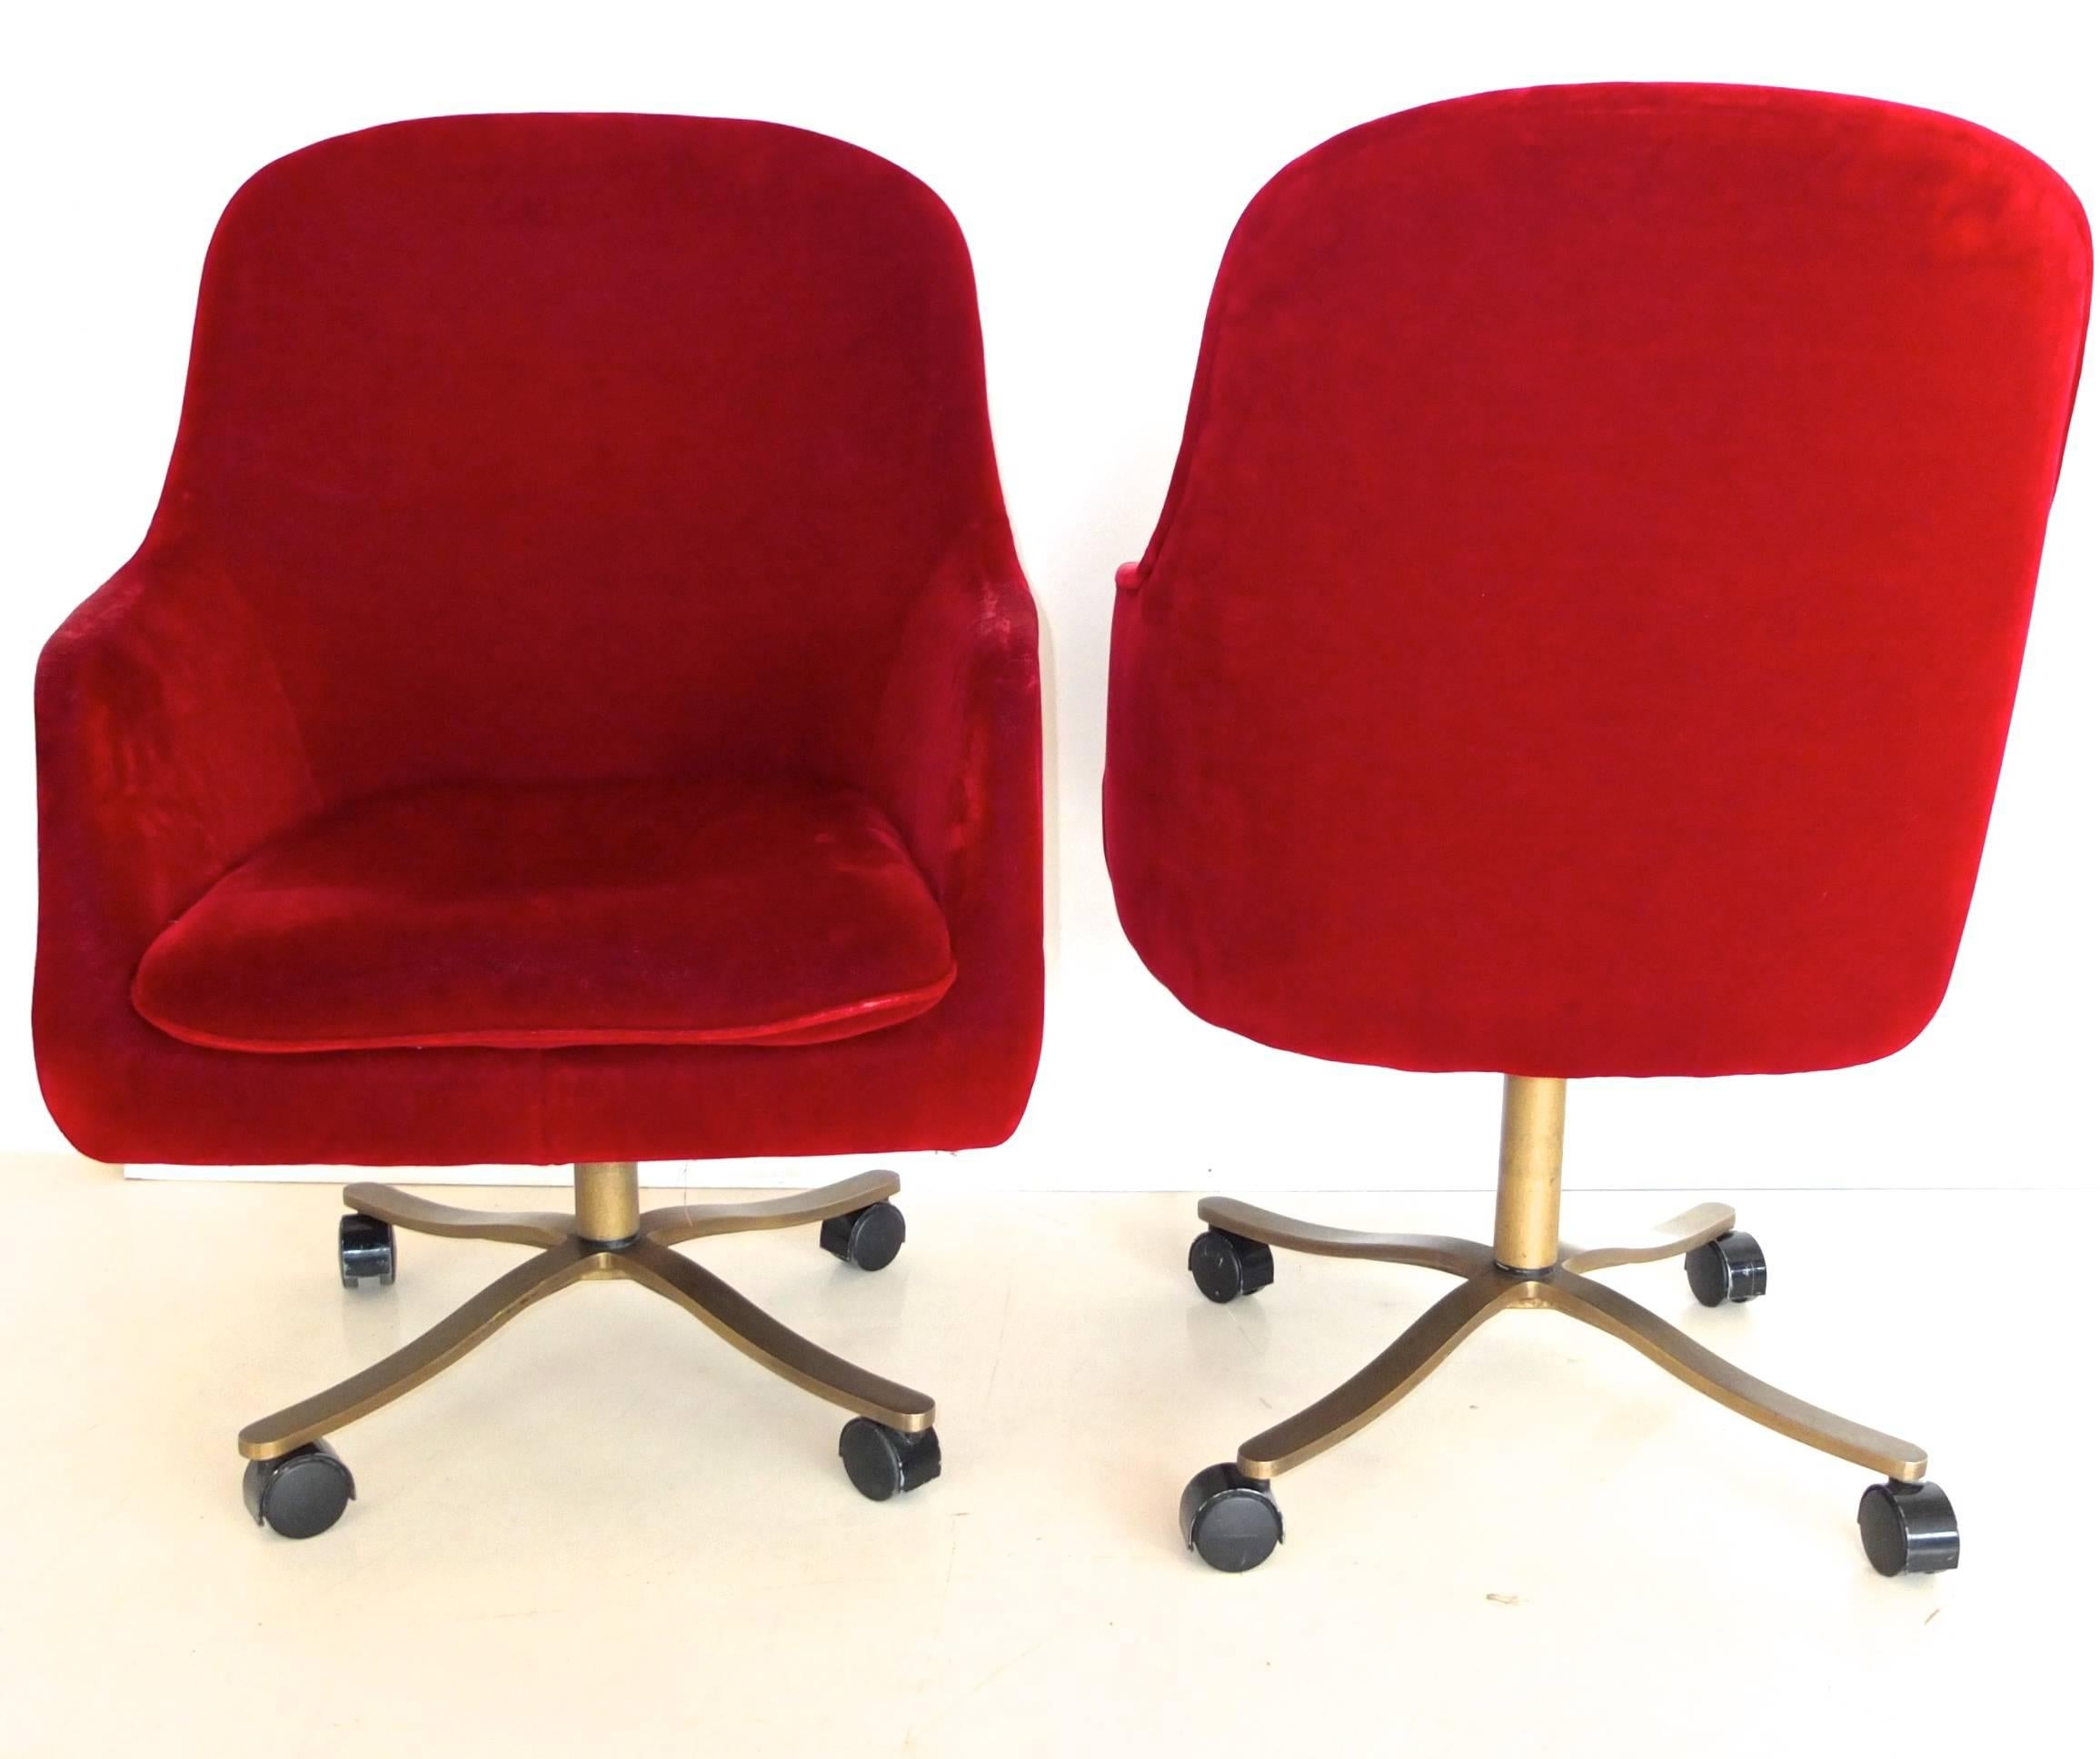 We have two of these vintage Nicos Zographos high quality executive swivel or return chairs, available individually or as a pair.

Each chair has a solid bronze four star base on wheels and is upholstered in claret red mohair.

They both have